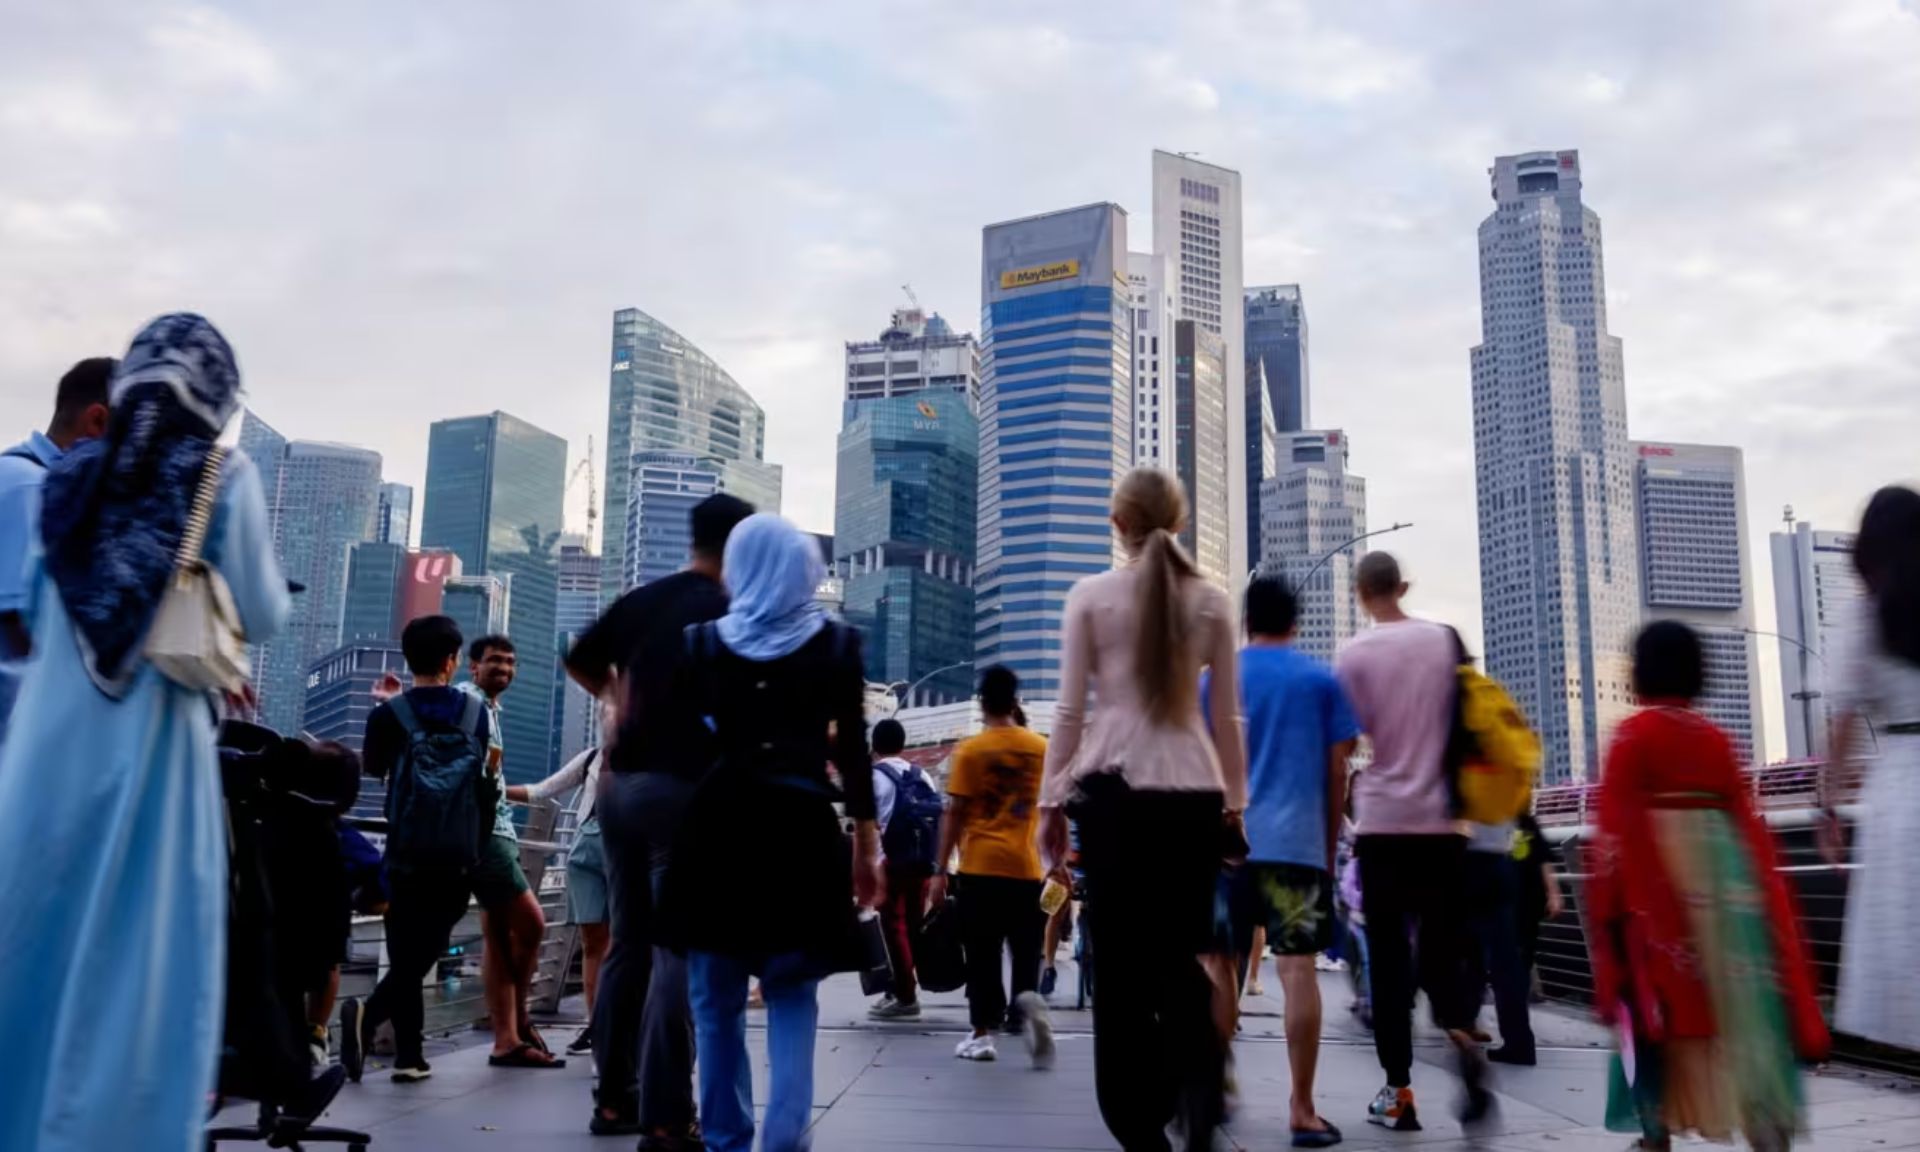 Singapore attracts start-up businesses from a wide range of sectors including manufacturing, AI and healthcare